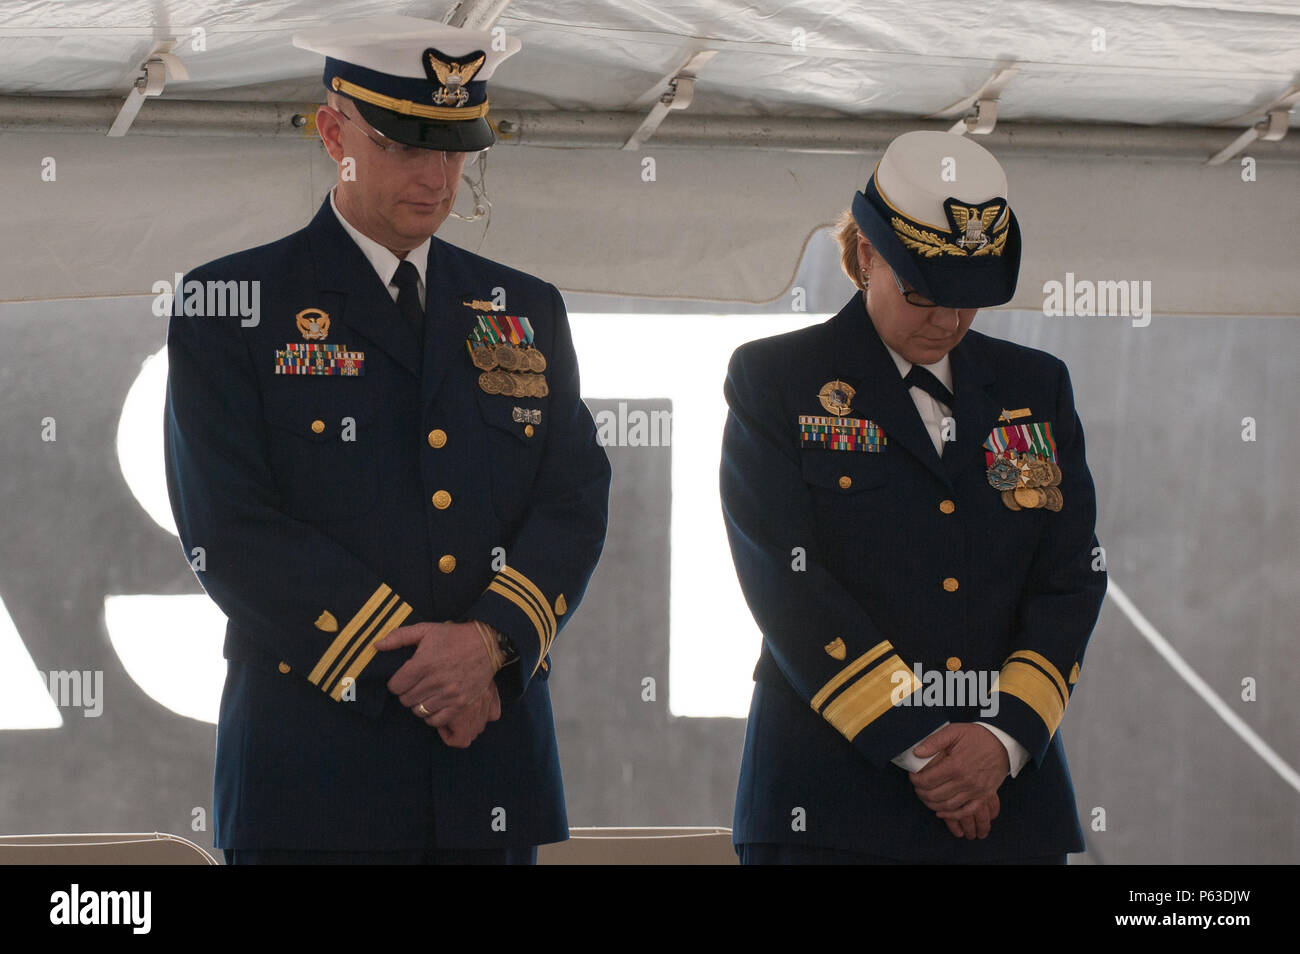 Lt. Cmdr. Daniel J. Twomey and Rear Adm. Linda Fagan bow their heads during  the change of command ceremony for the Coast Guard Cutter Willow, Friday,  April 22, 2016, in Newport, Rhode